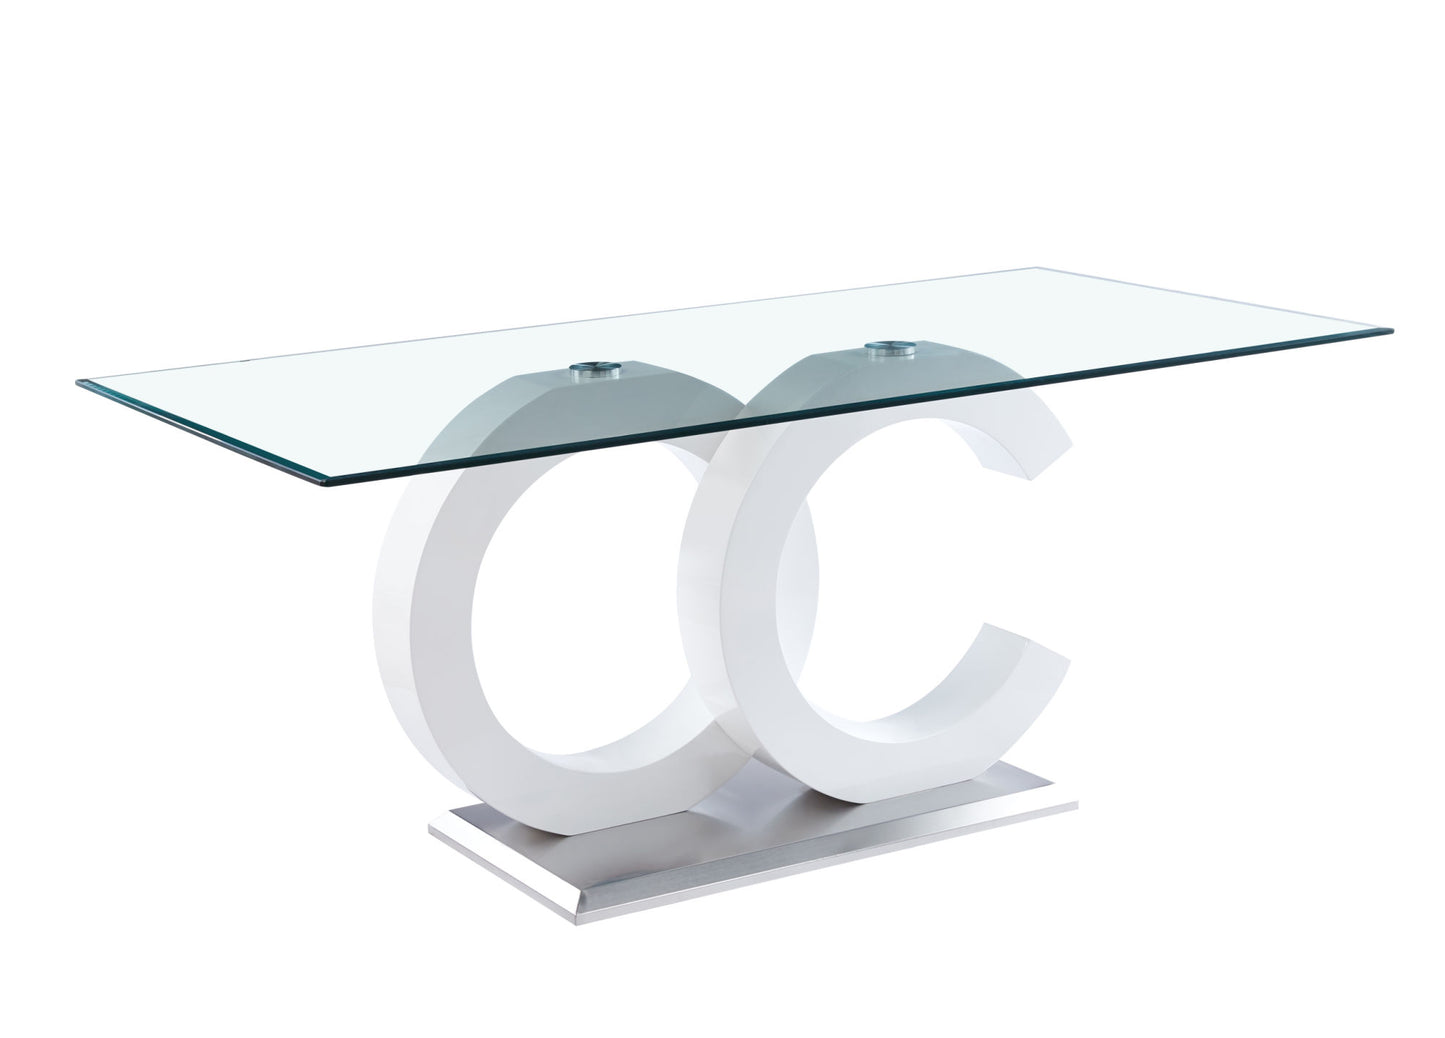 mdf #2 dining table - tempered glass